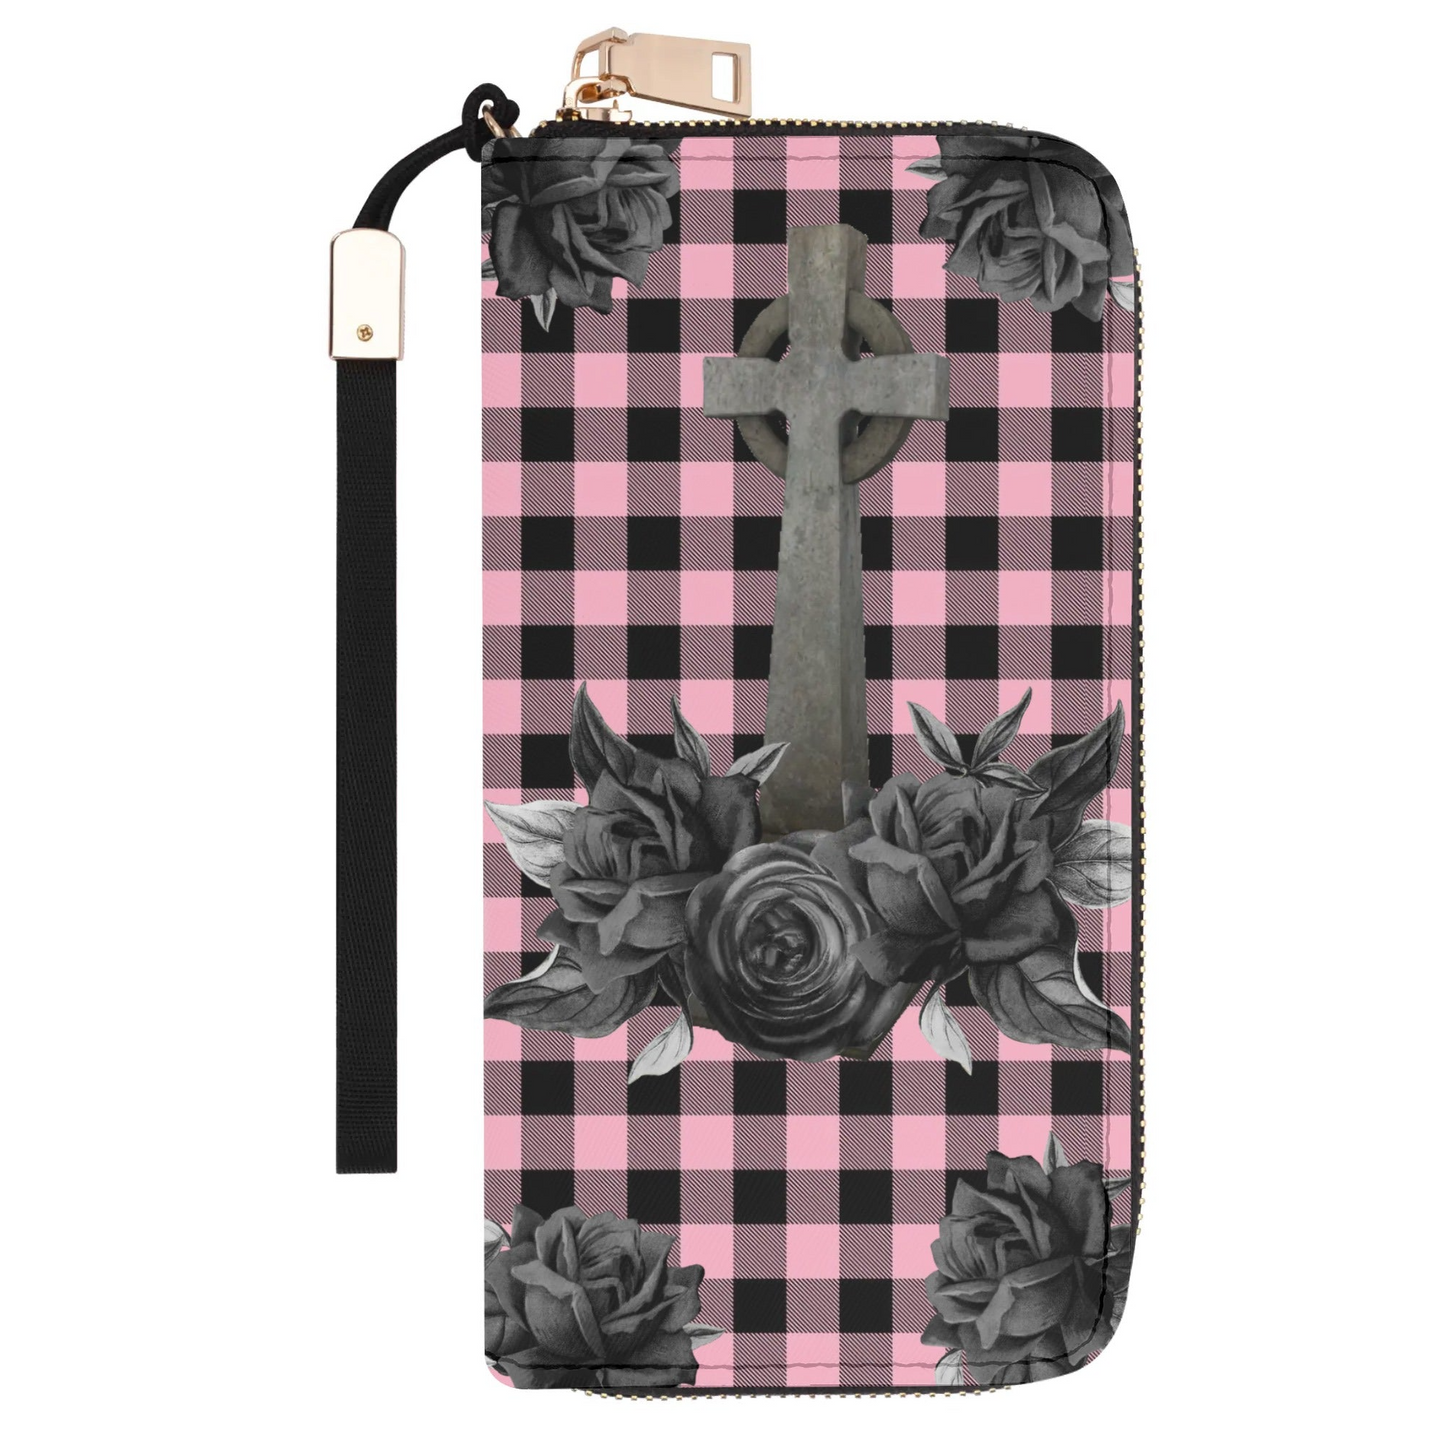 Cemetery Picnic Clutch Wallet in Ghoulish Pink